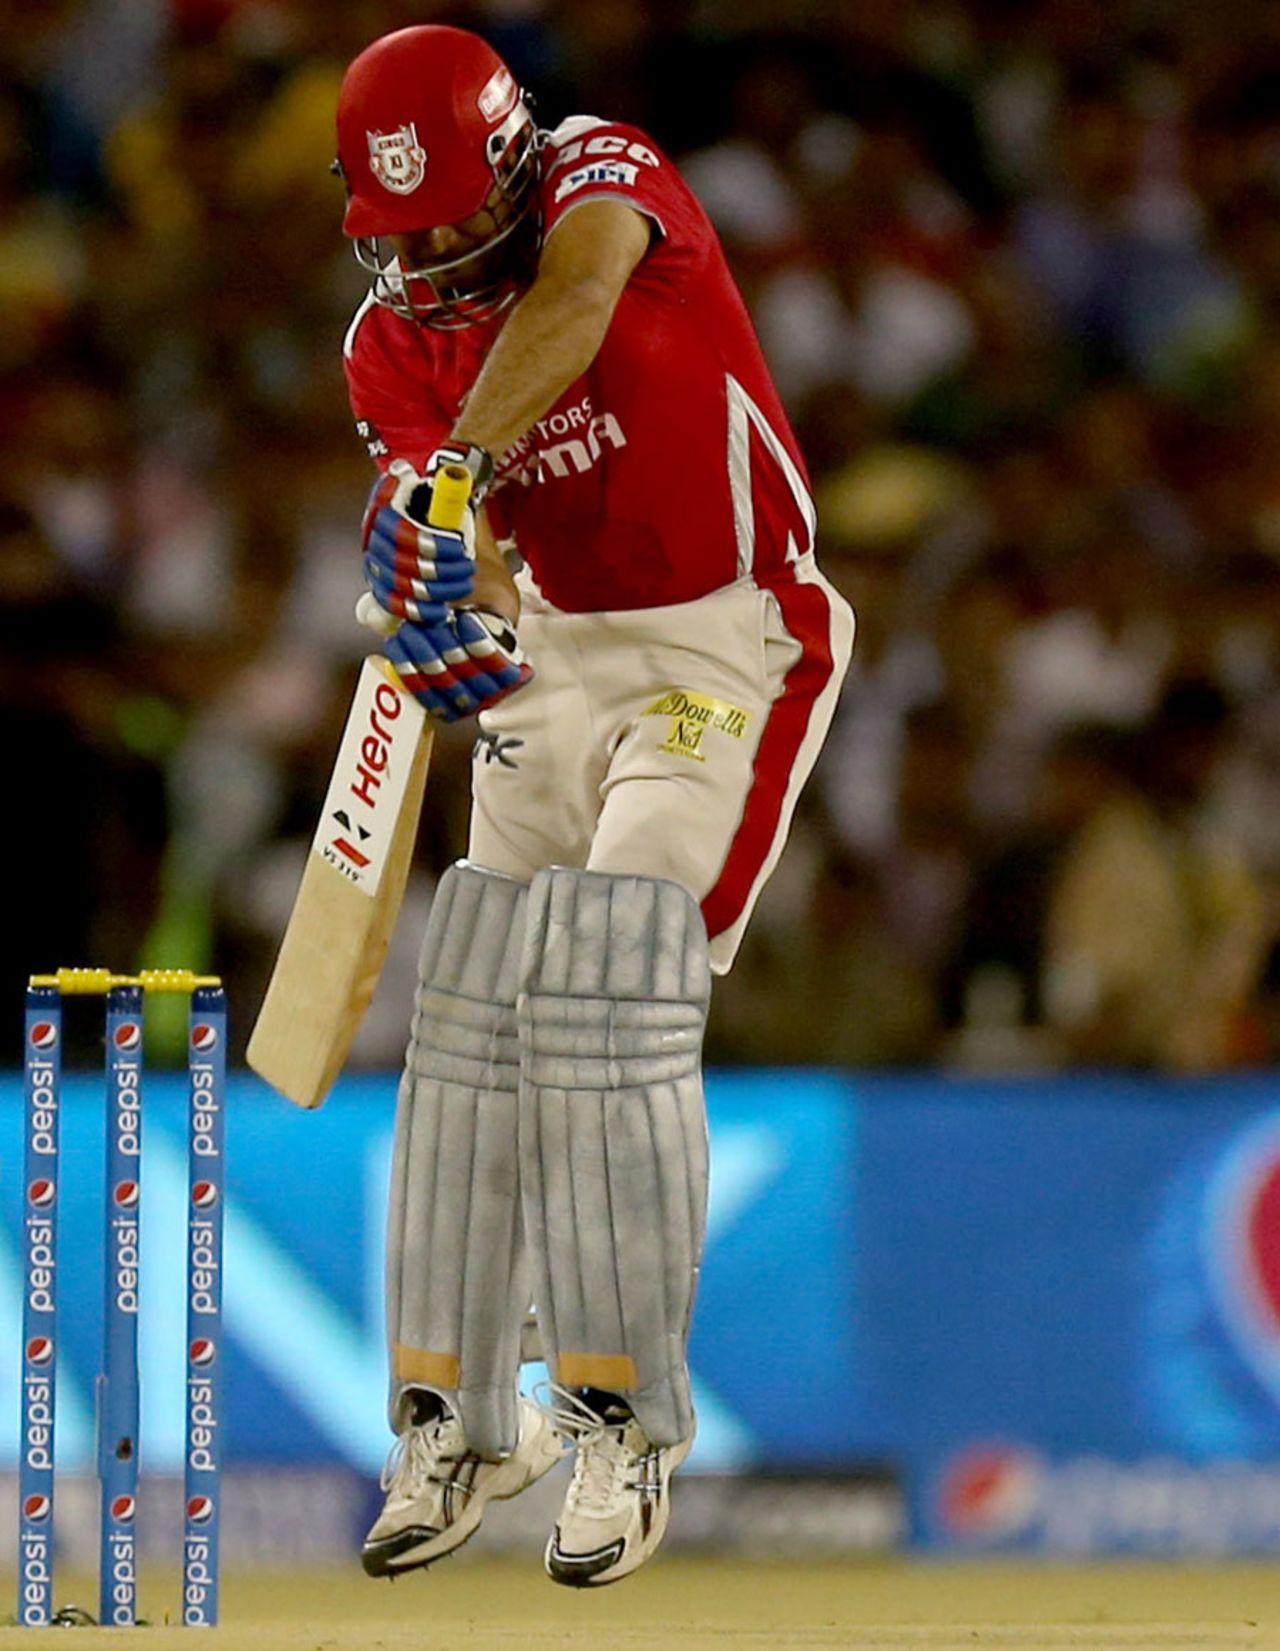 Virender Sehwag plays one off his toes, Kings XI Punjab v Chennai Super Kings, IPL 2014, Cuttack, May 7, 2014